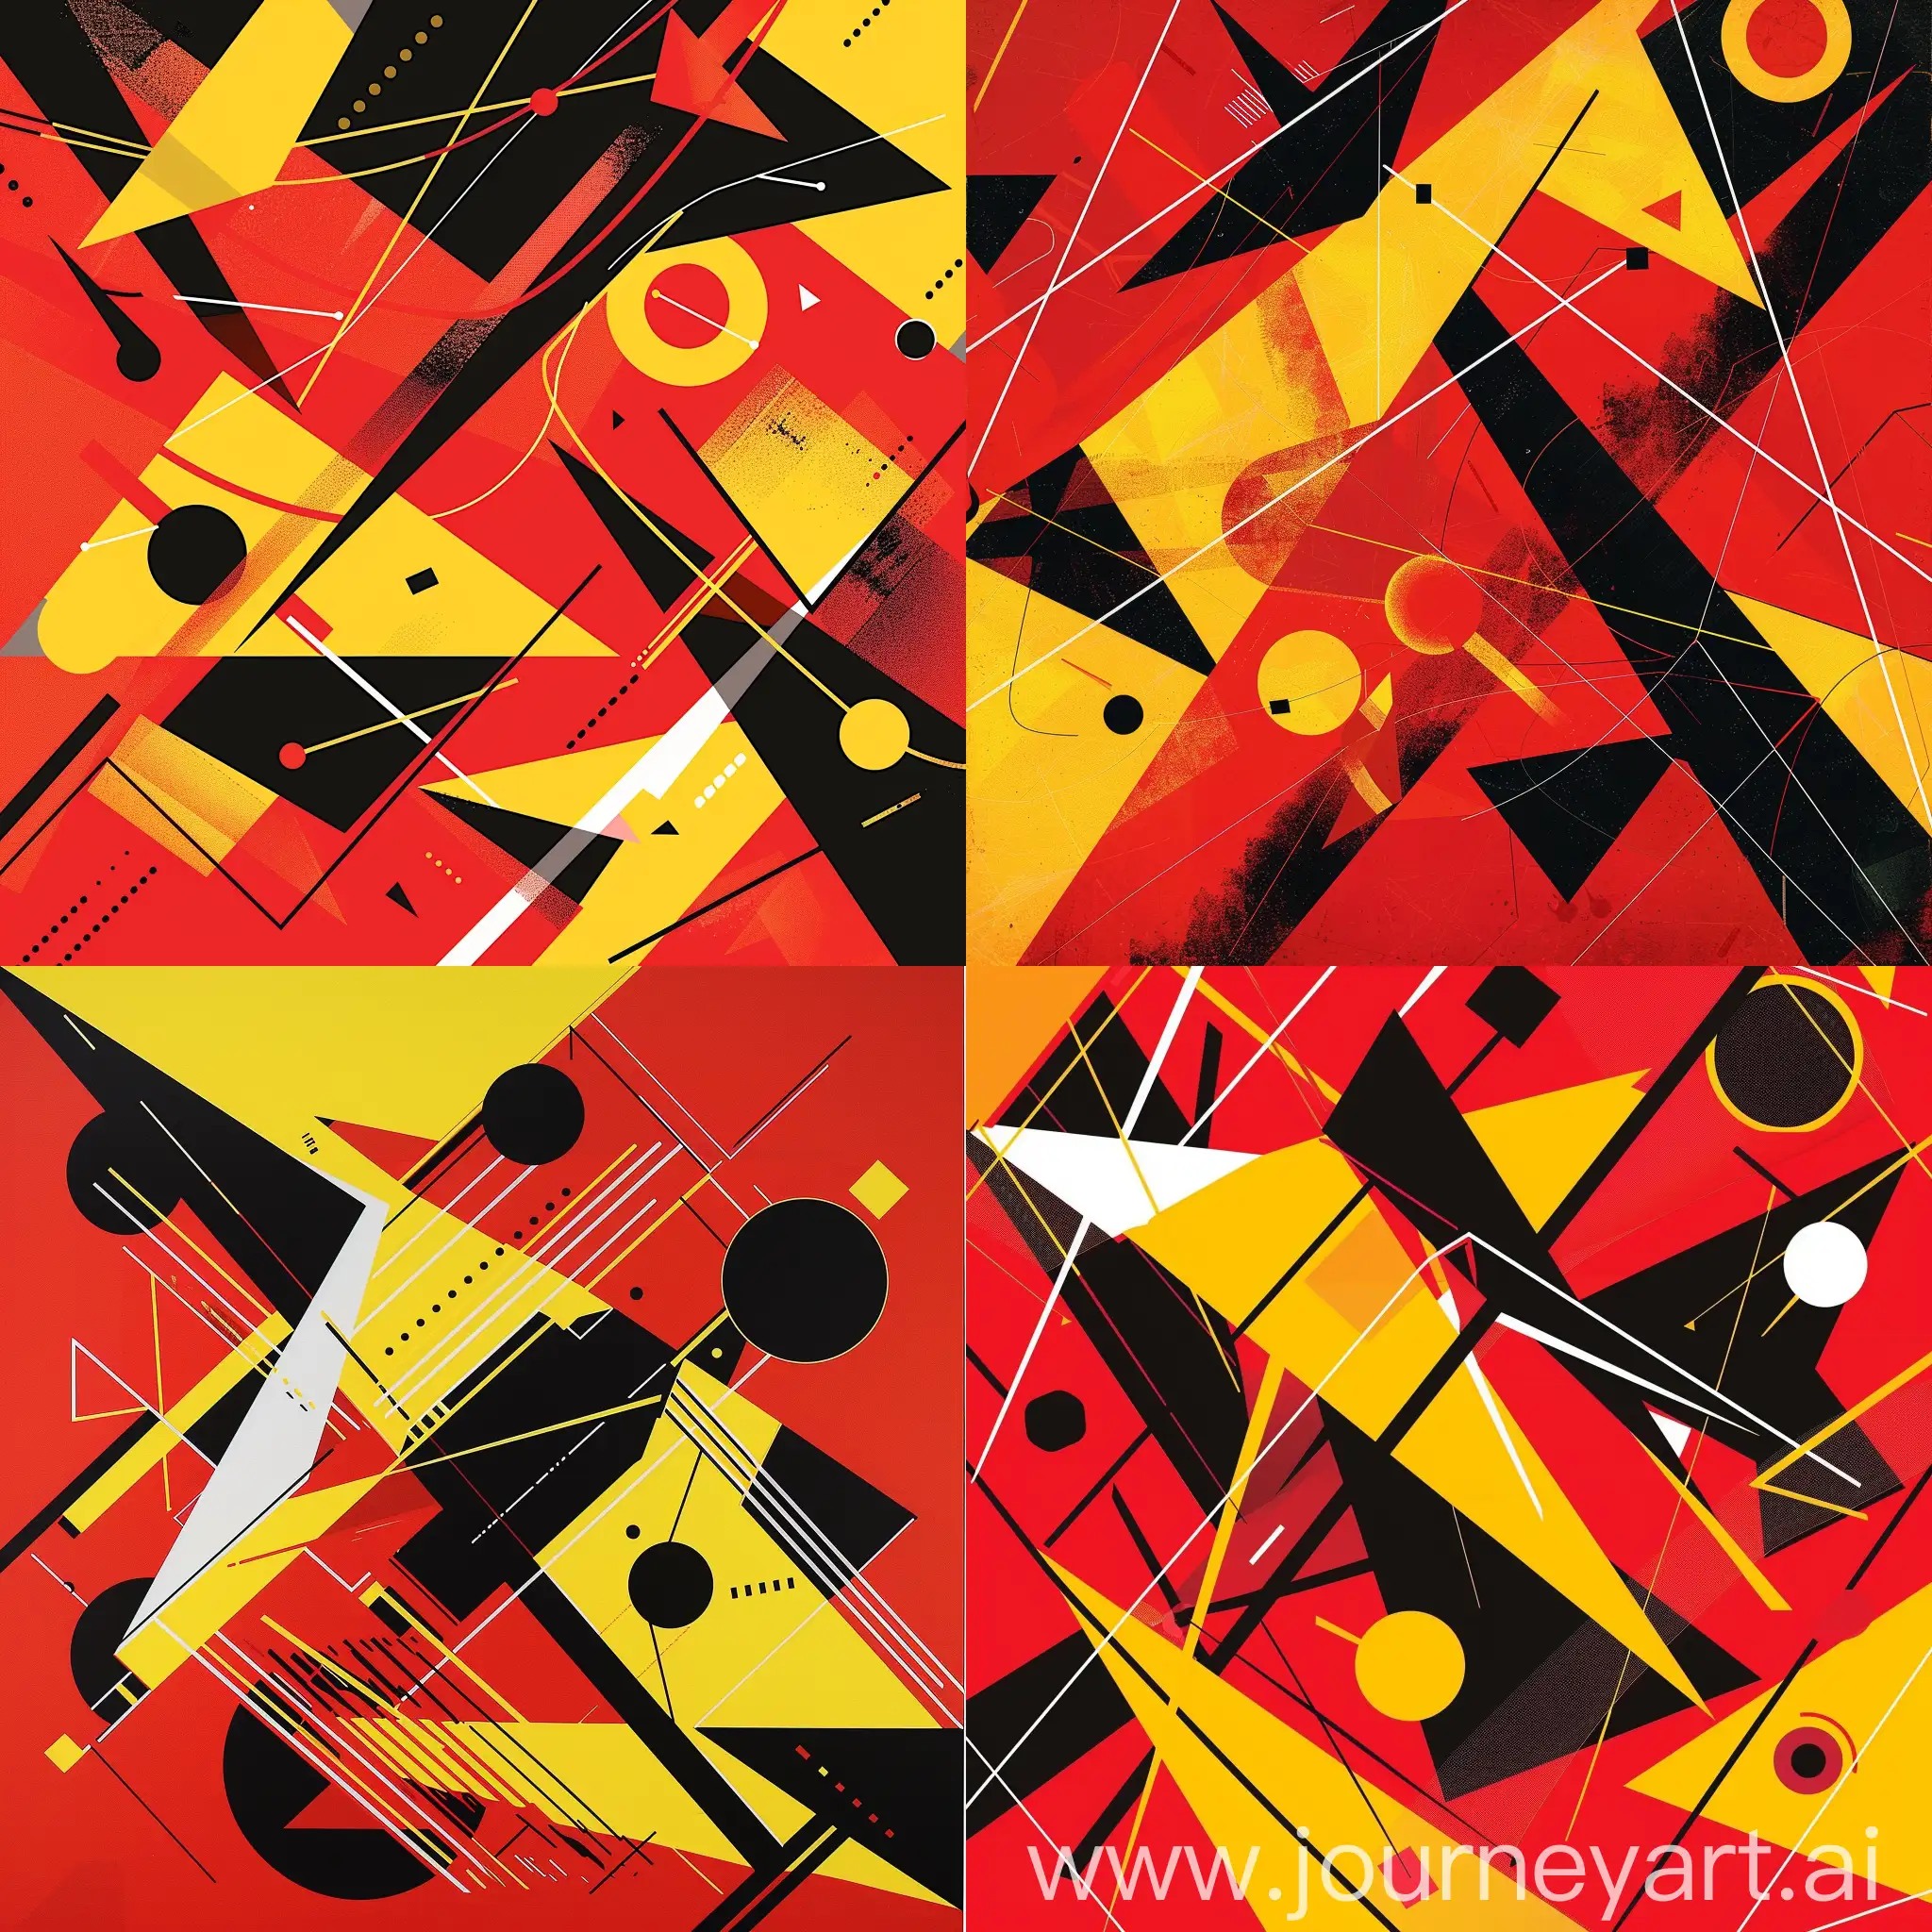 A striking abstract geometric composition with bold, contrasting shapes and colors. The image features a vibrant red background with overlapping yellow and black geometric elements, including triangles, lines, and circular shapes. The overall design has a dynamic, energetic feel, evoking a sense of movement and visual interest.